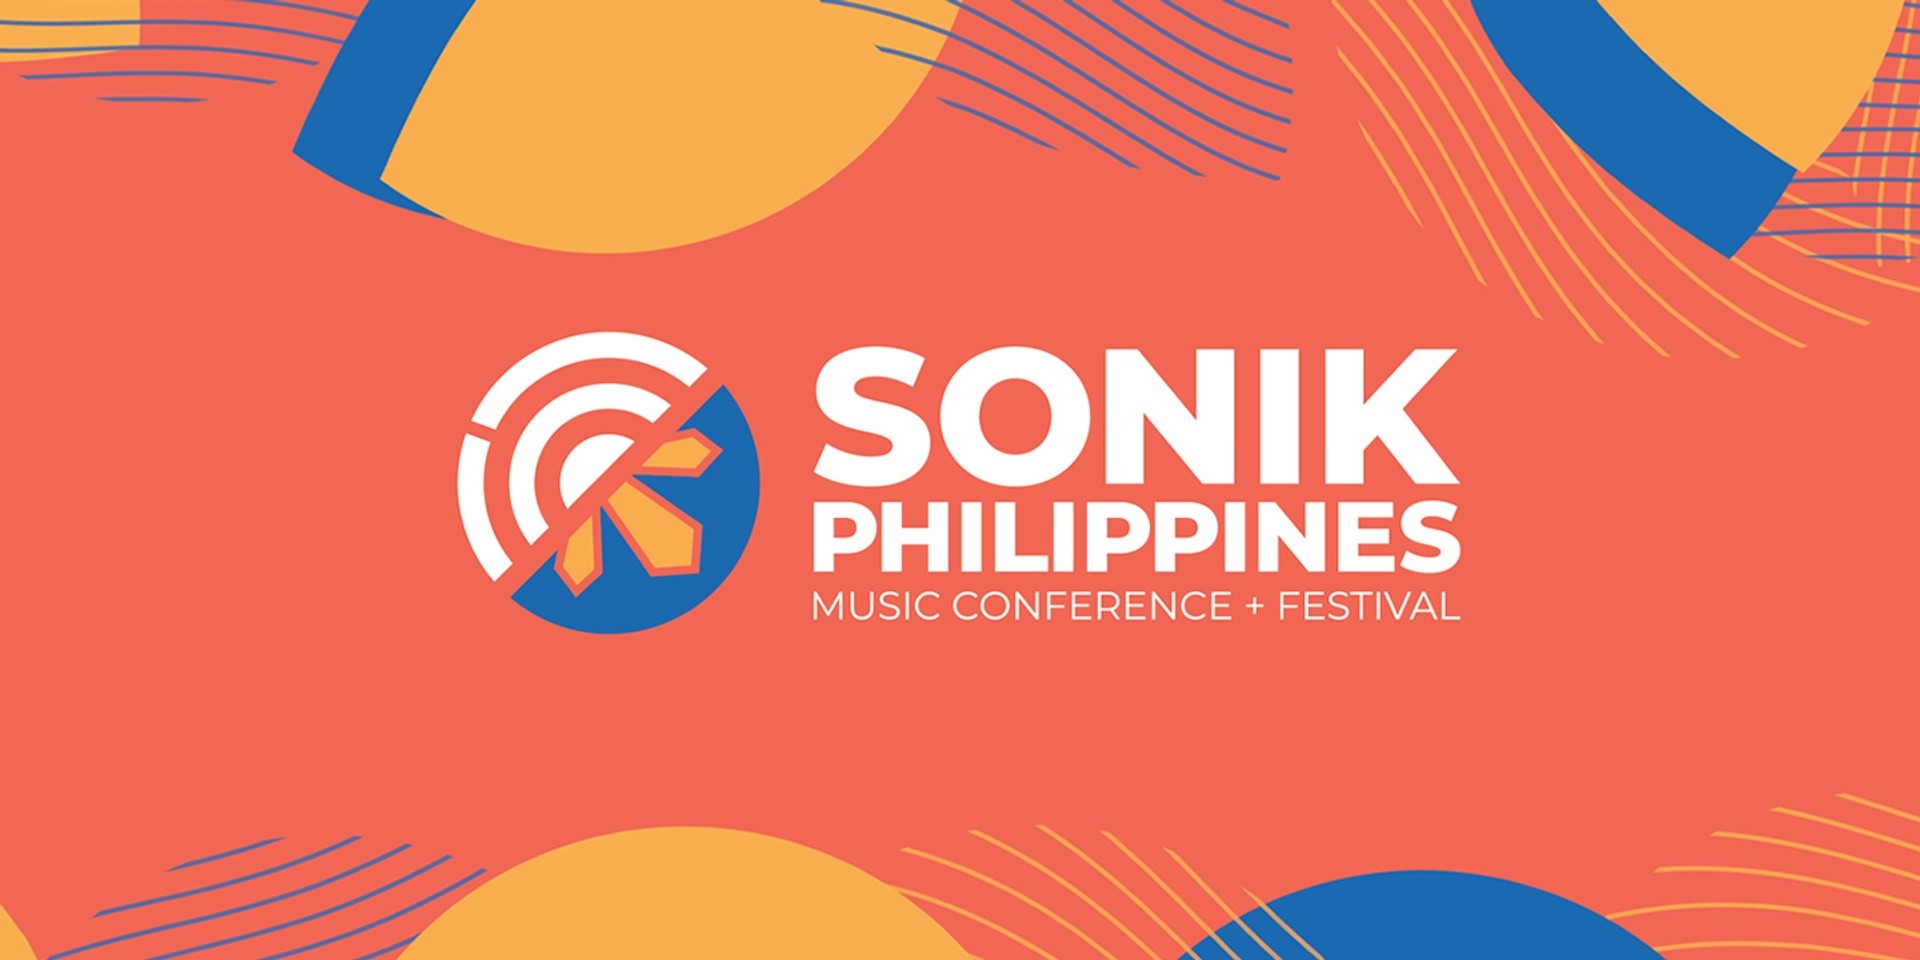 Discover the creative and business sides of the music industry at the first Sonik Philippines conference